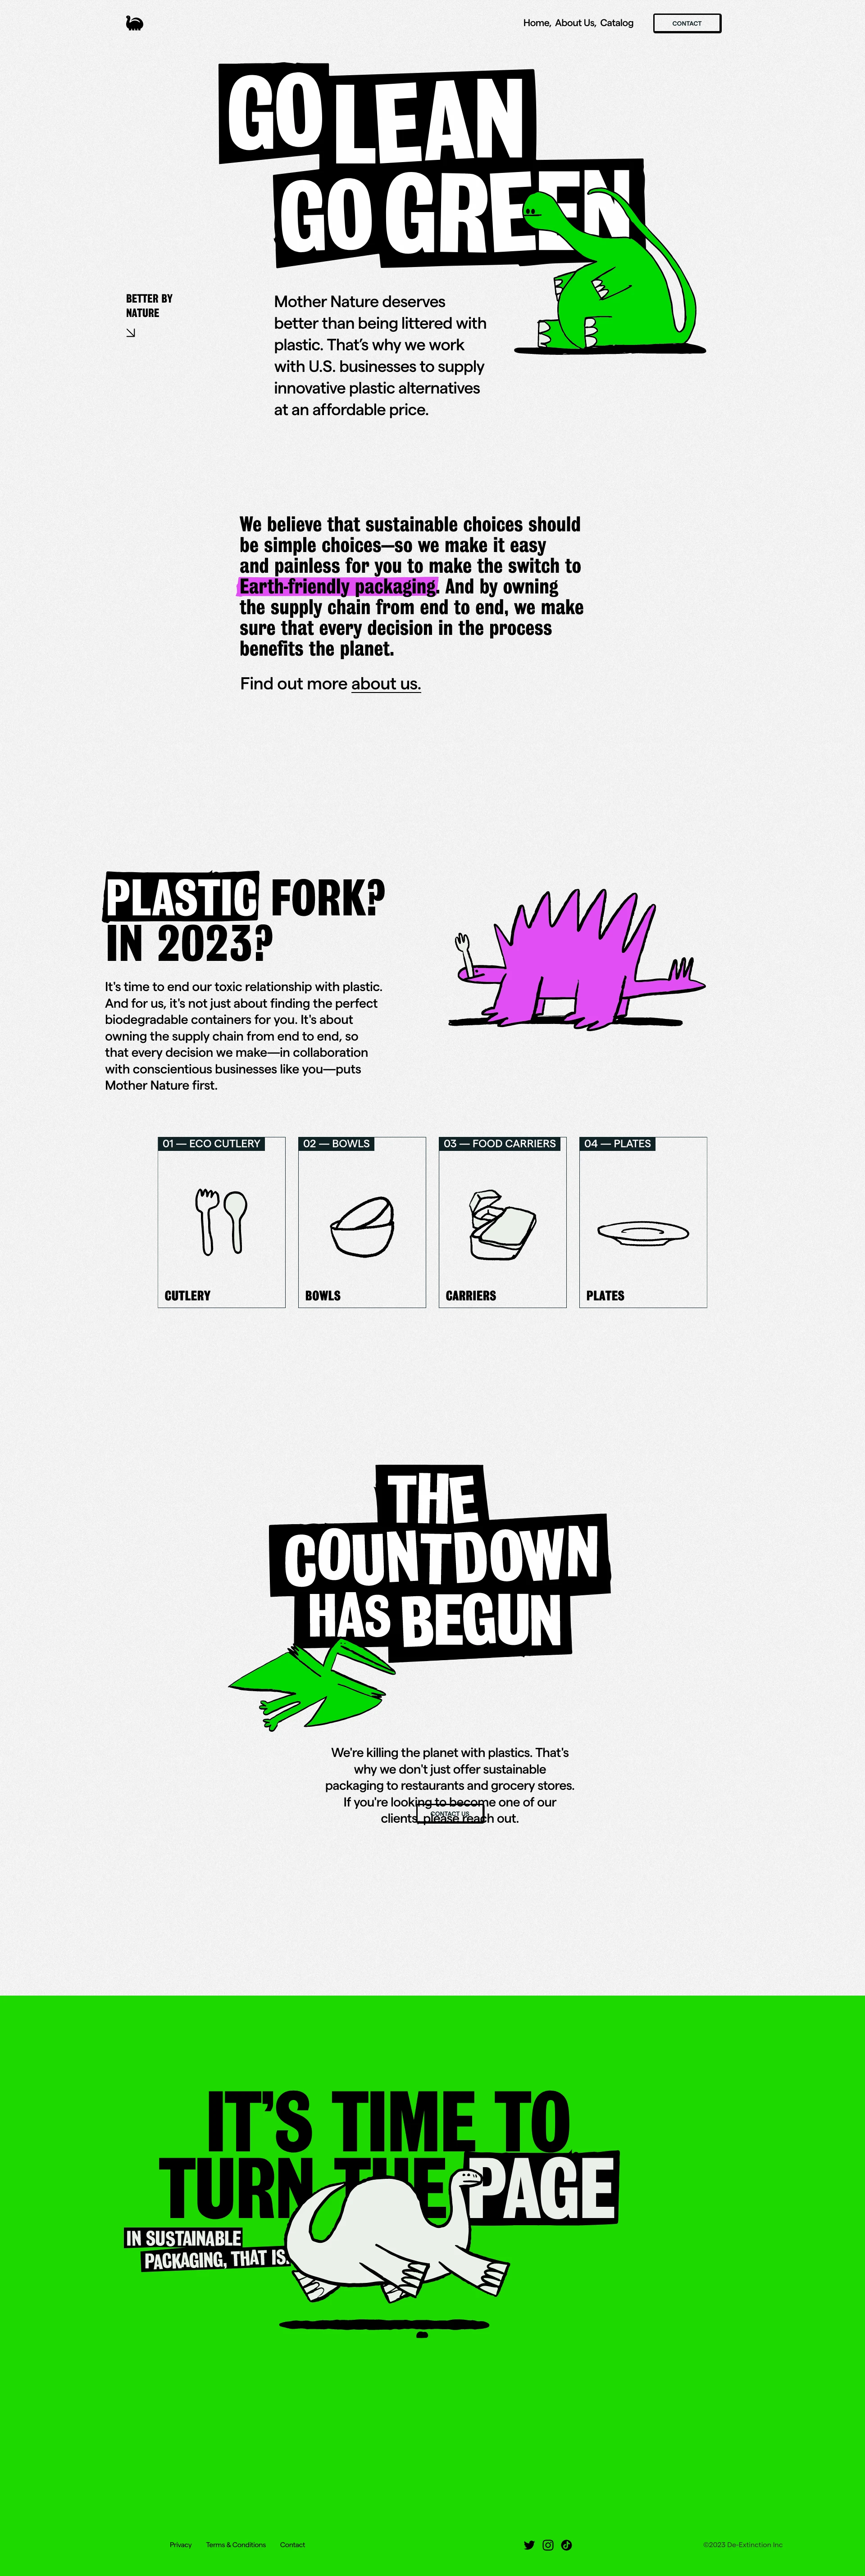 De-Extinction Landing Page Example: Mother Nature deserves better than being littered with plastic. That’s why we work with U.S. businesses to supply innovative plastic alternatives at an affordable price.